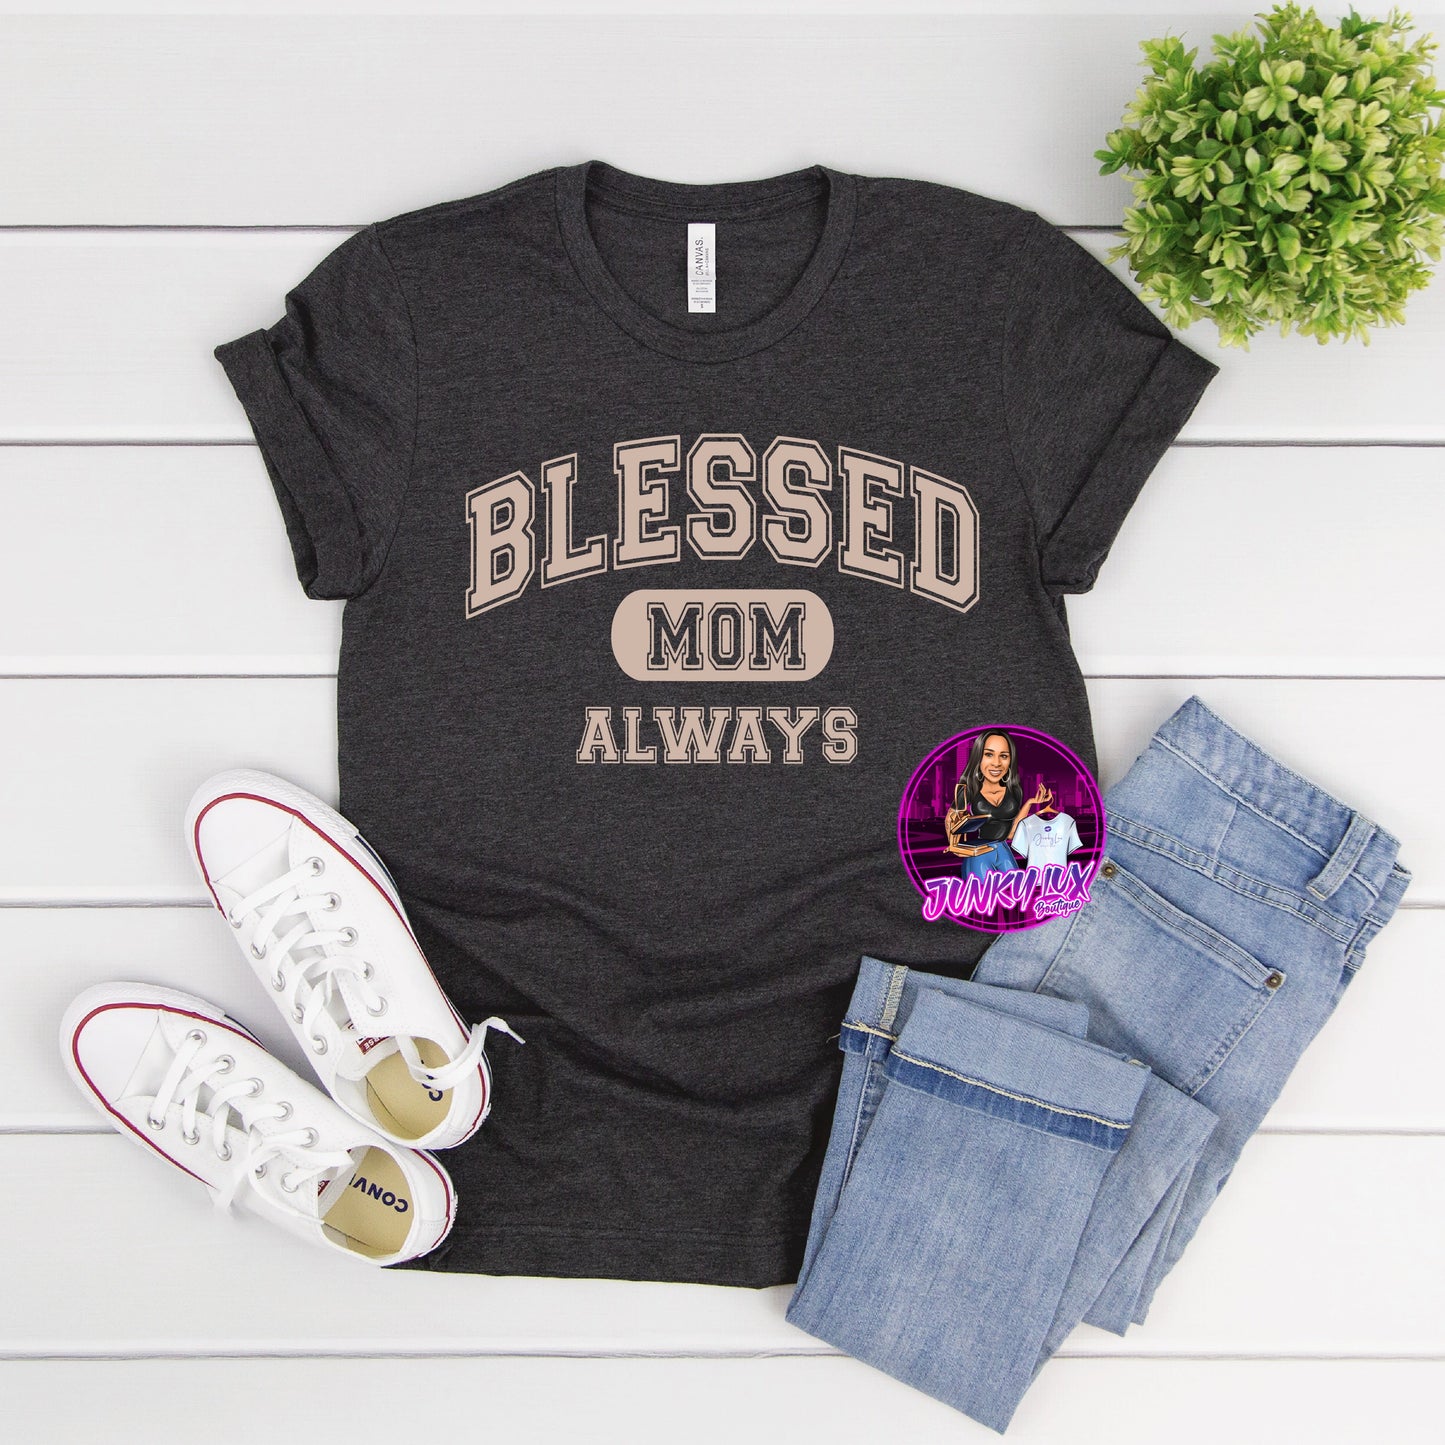 Blessed Mom (with sleeve)